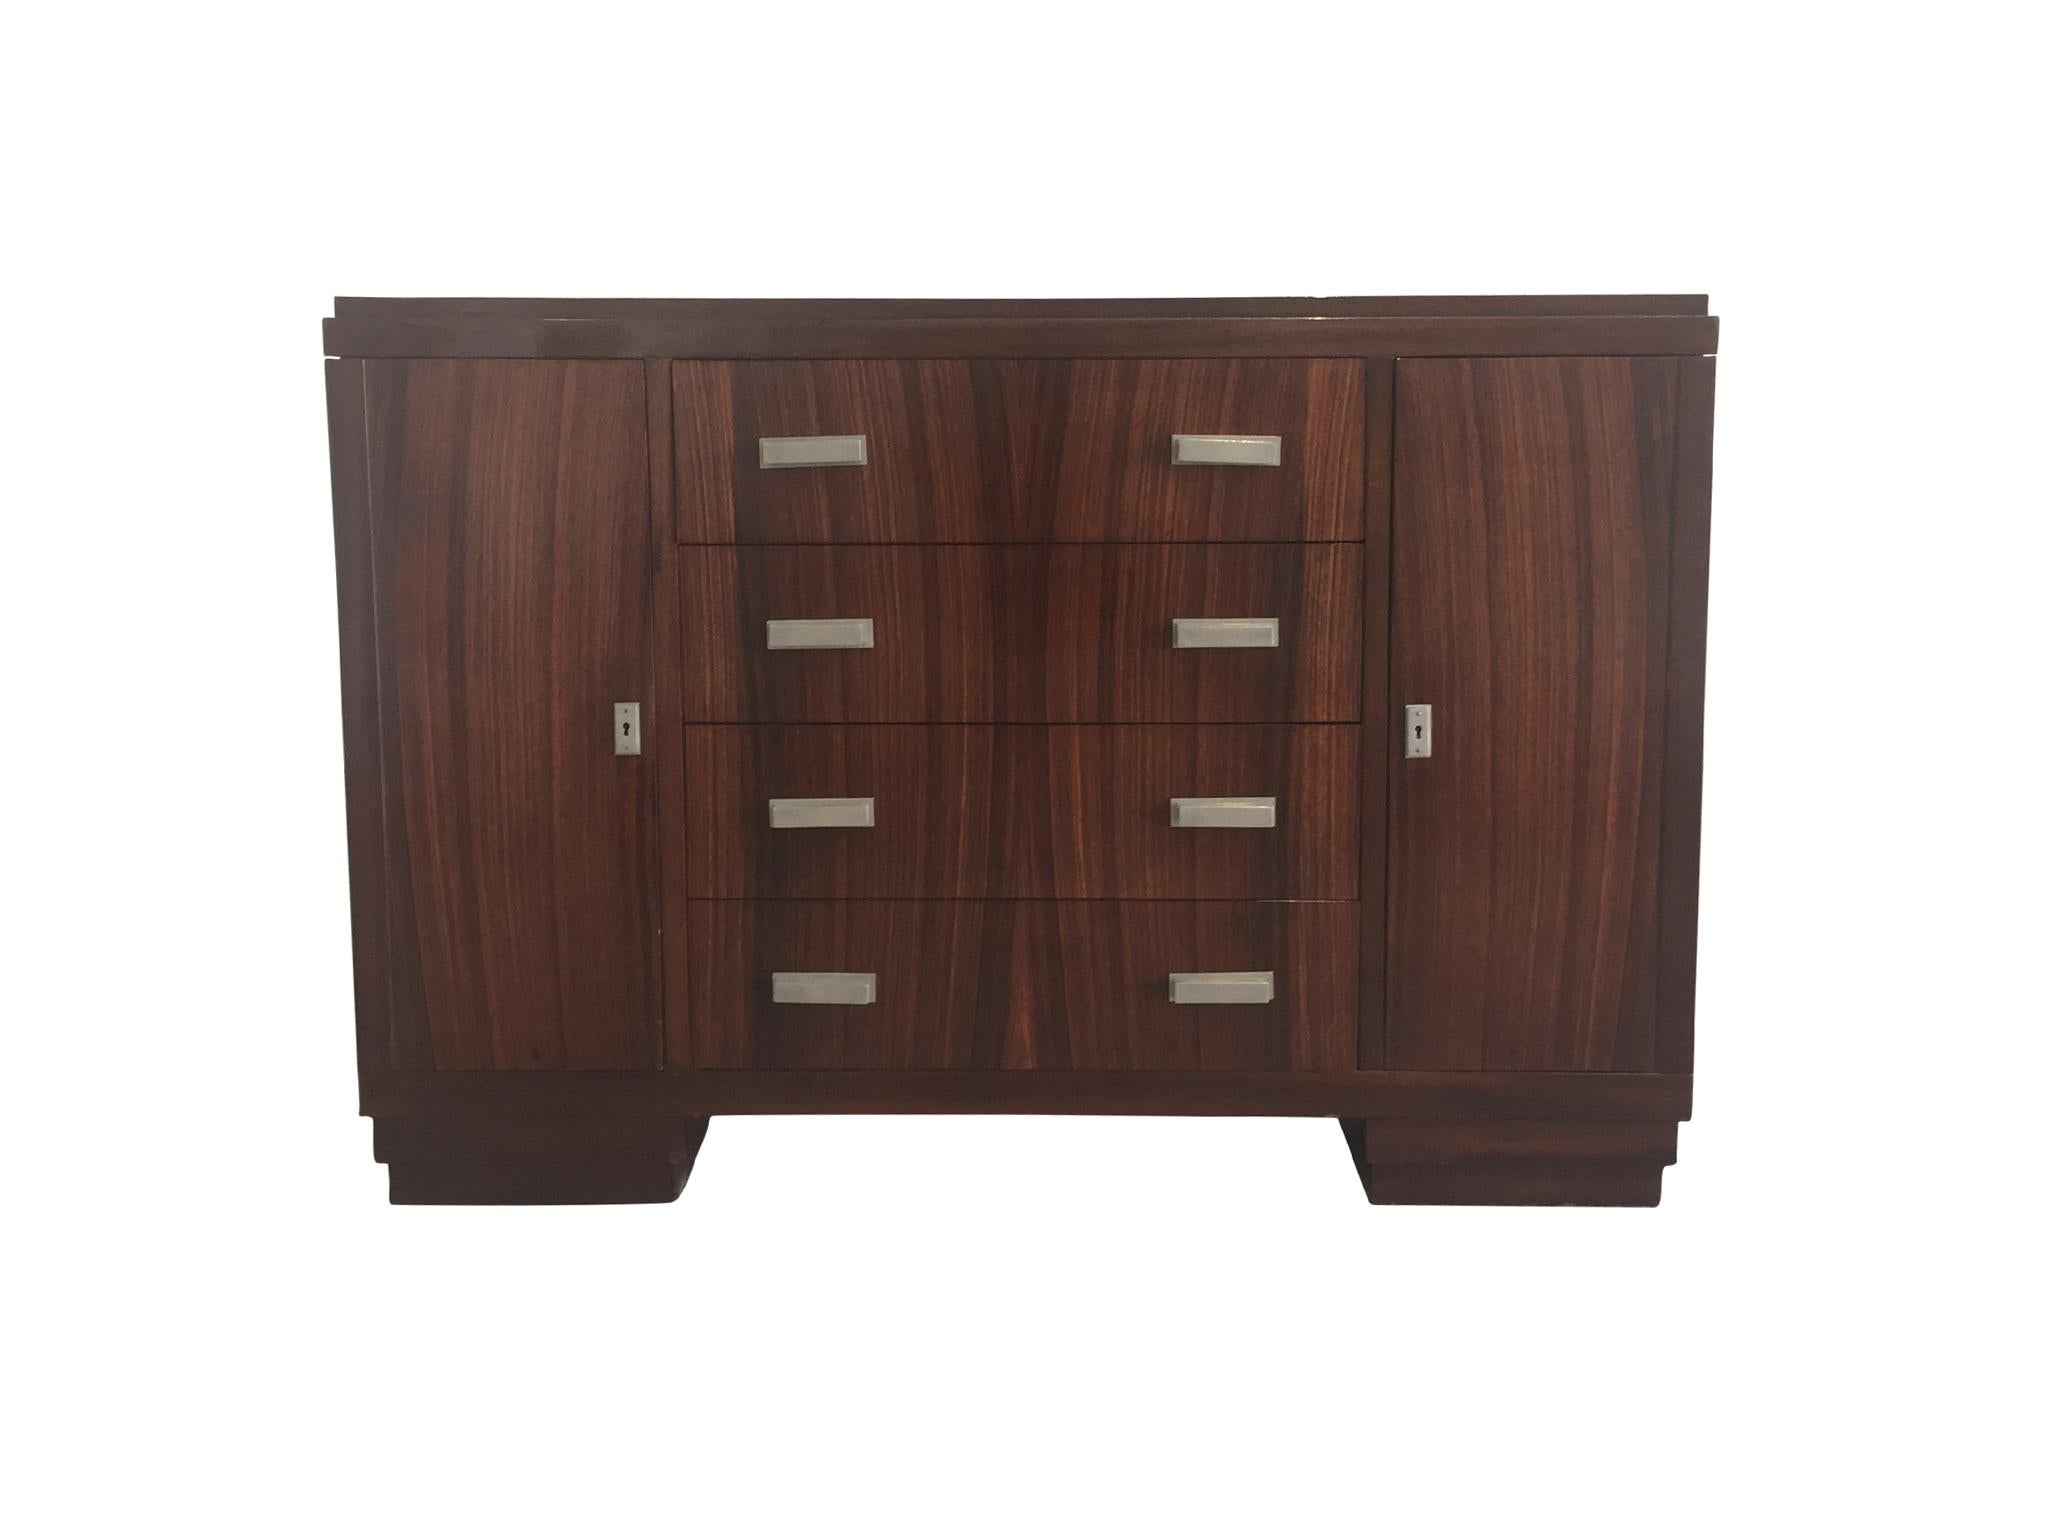 An exquisite French Art Deco cabinet or chest of drawers designed and made by Maison Soubrier in the 1930s. It is comprised of Macassar ebony wood in a warm reddish brown tone. The rare wood is known for its beautiful stripes, which here are modest,